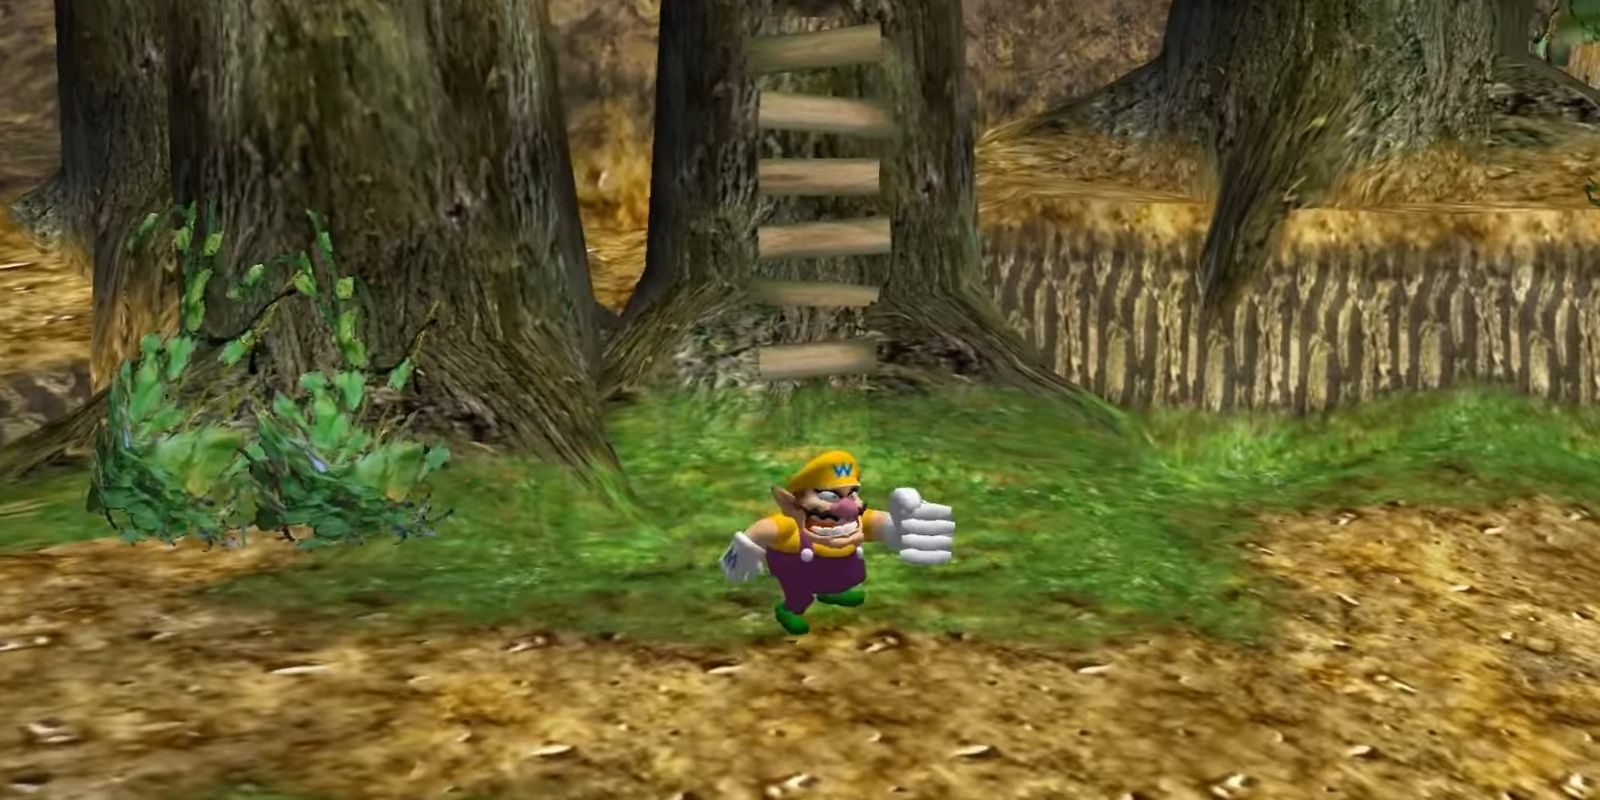 Wario punching with an enlarged fist in Wario World